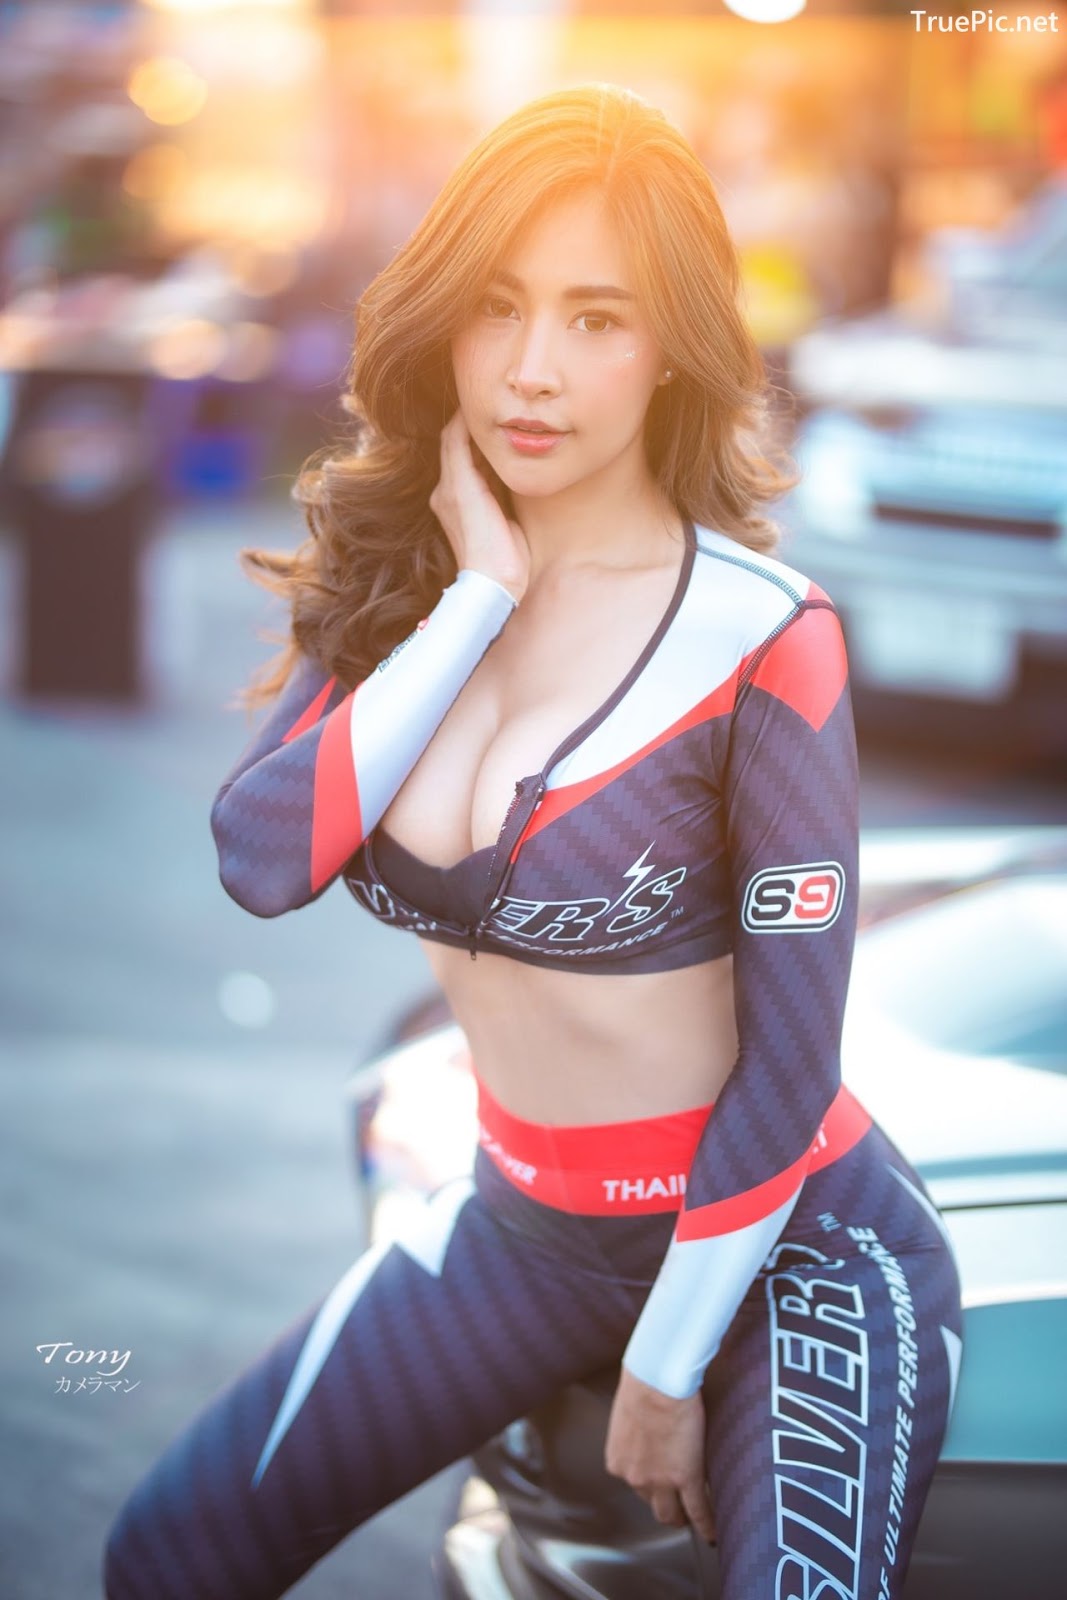 Image-Thailand-Hot-Model-Thai-Racing-Girl-At-Pathum-Thani-Speedway-TruePic.net- Picture-18